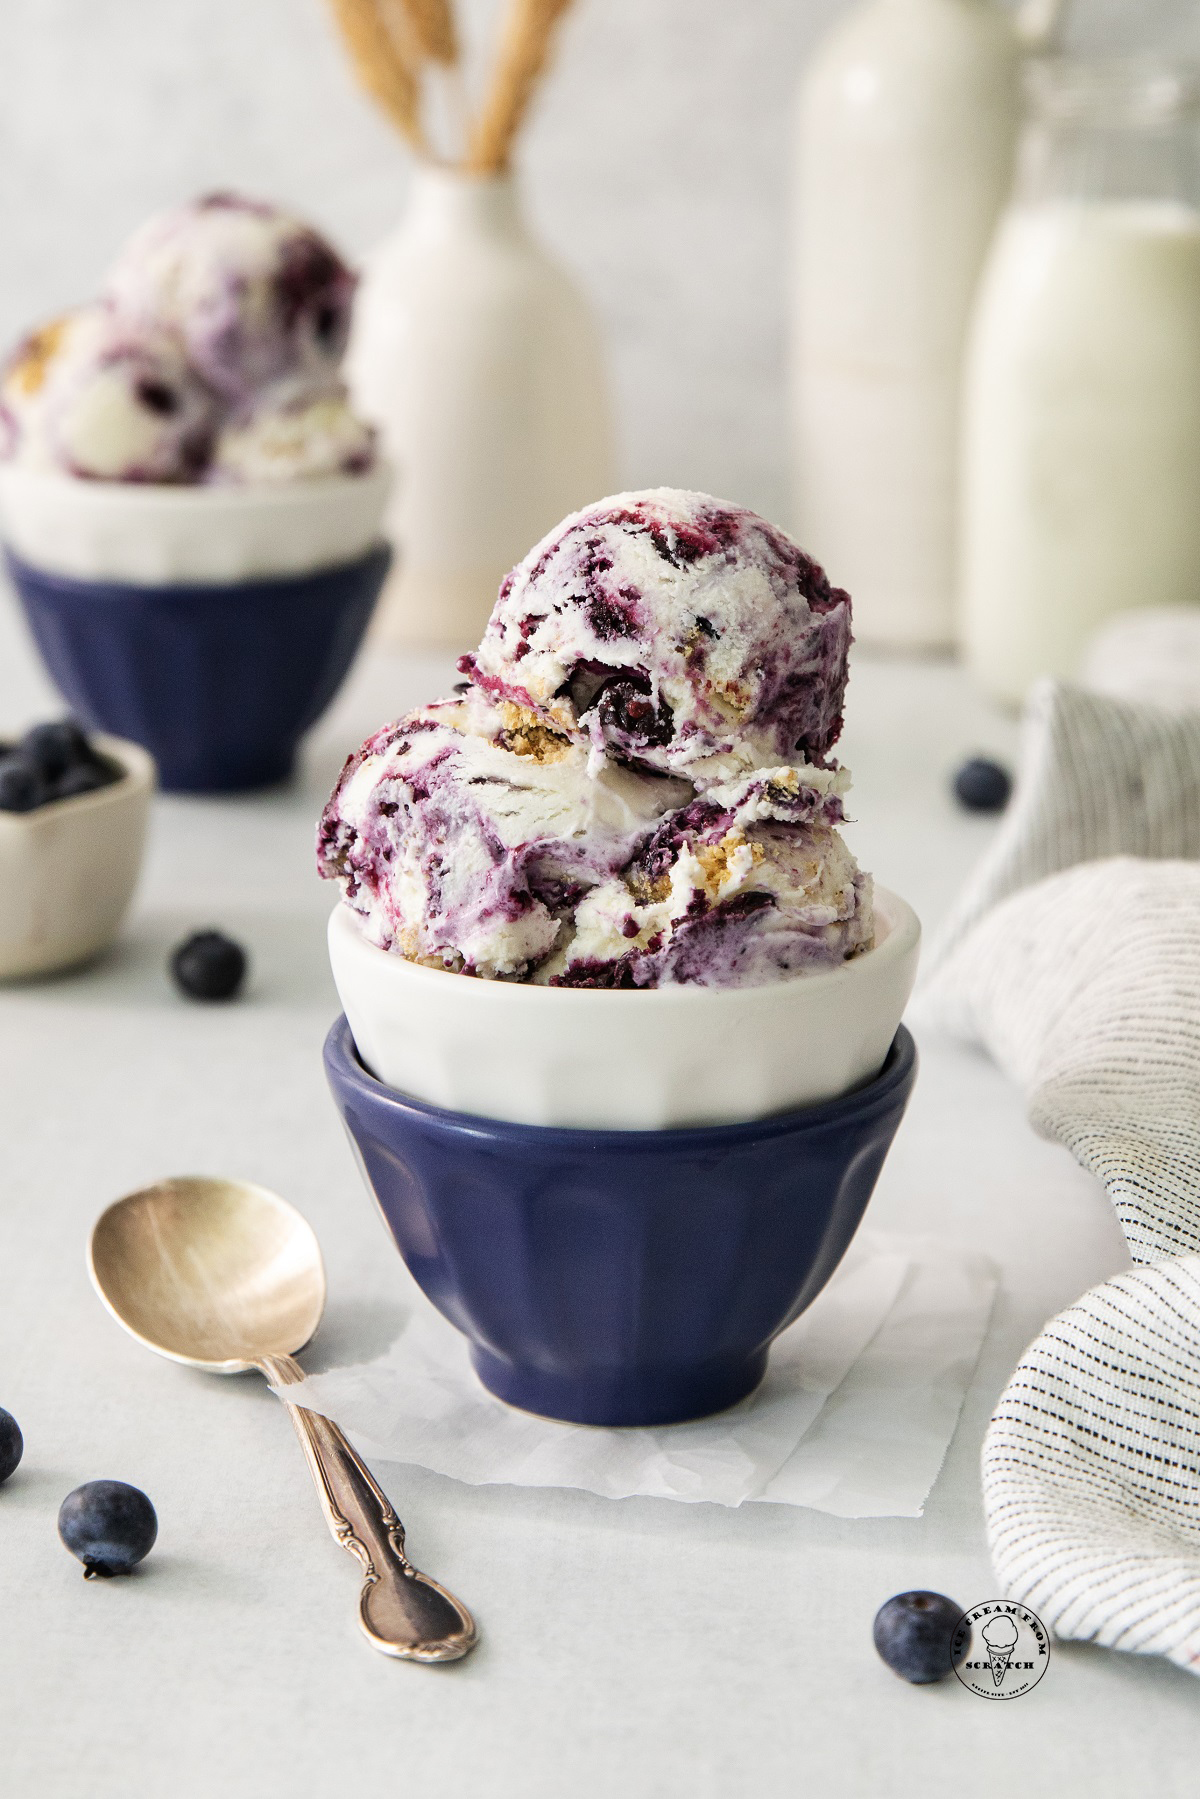 scoops of blueberry cheesecake ice cream in a blue ceramic bowl.